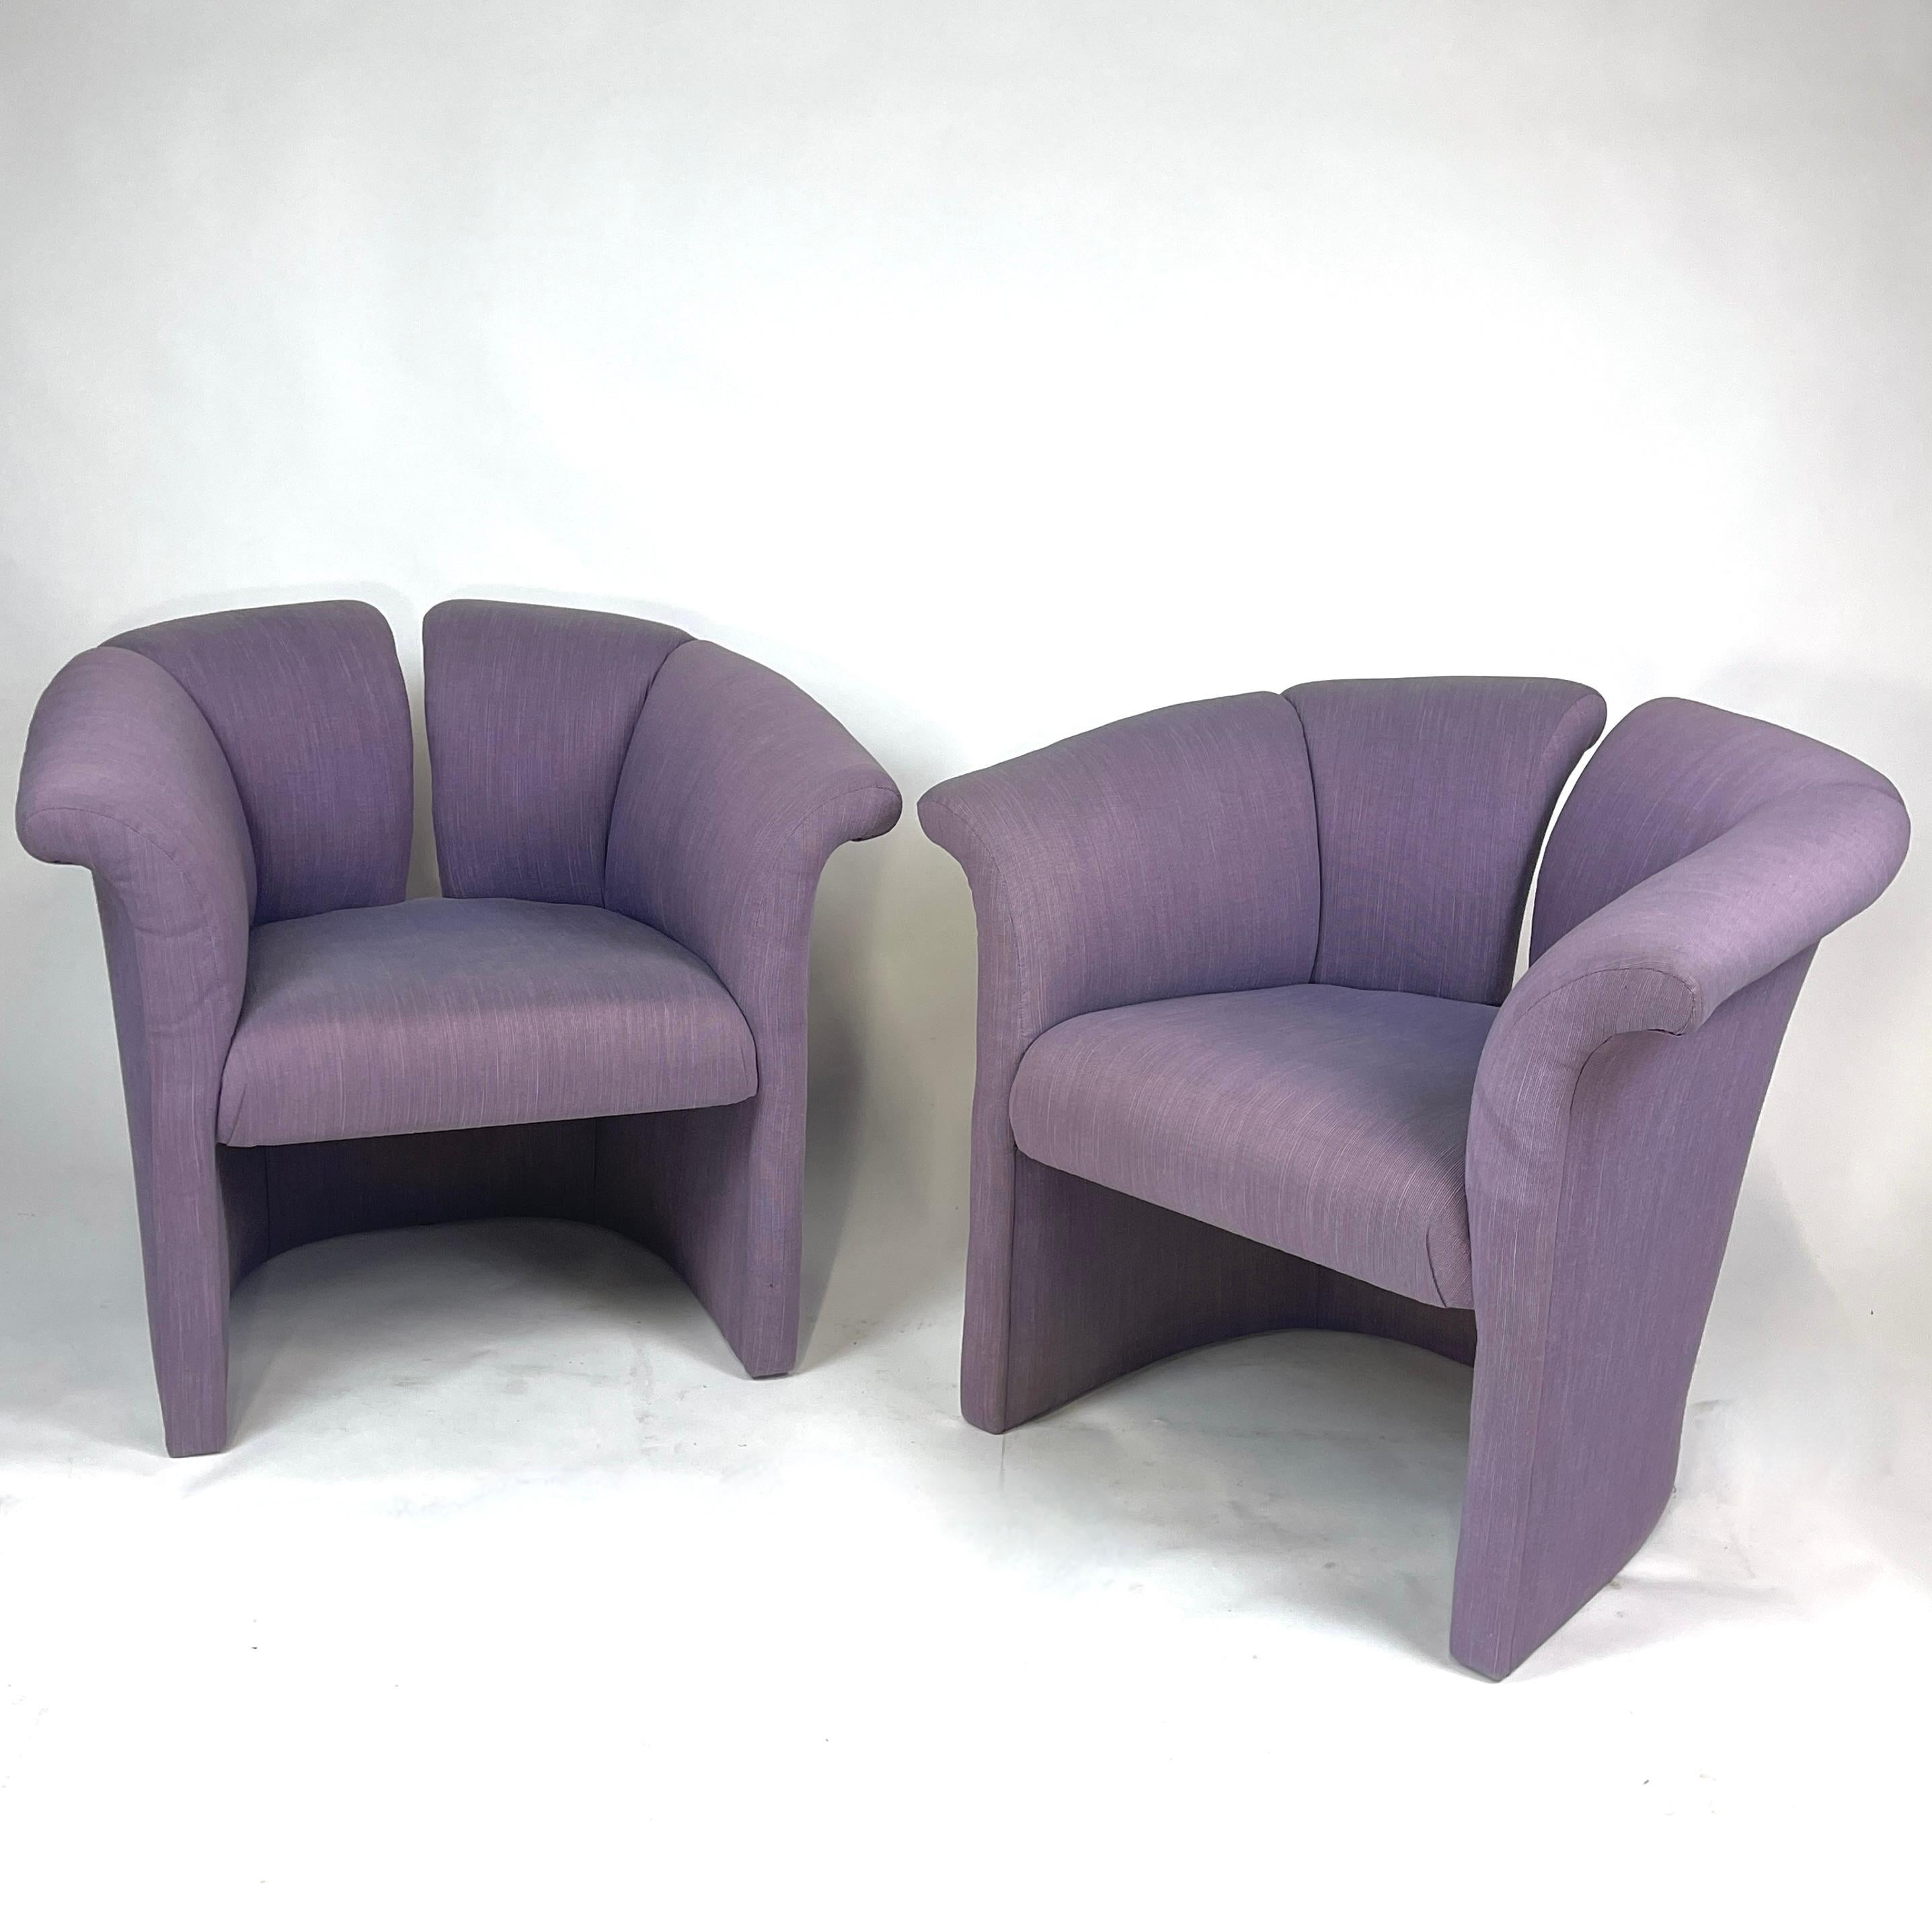 Stunning Pair of Split Back Postmodern Barrel Chairs in Excellent Upholstery For Sale 7